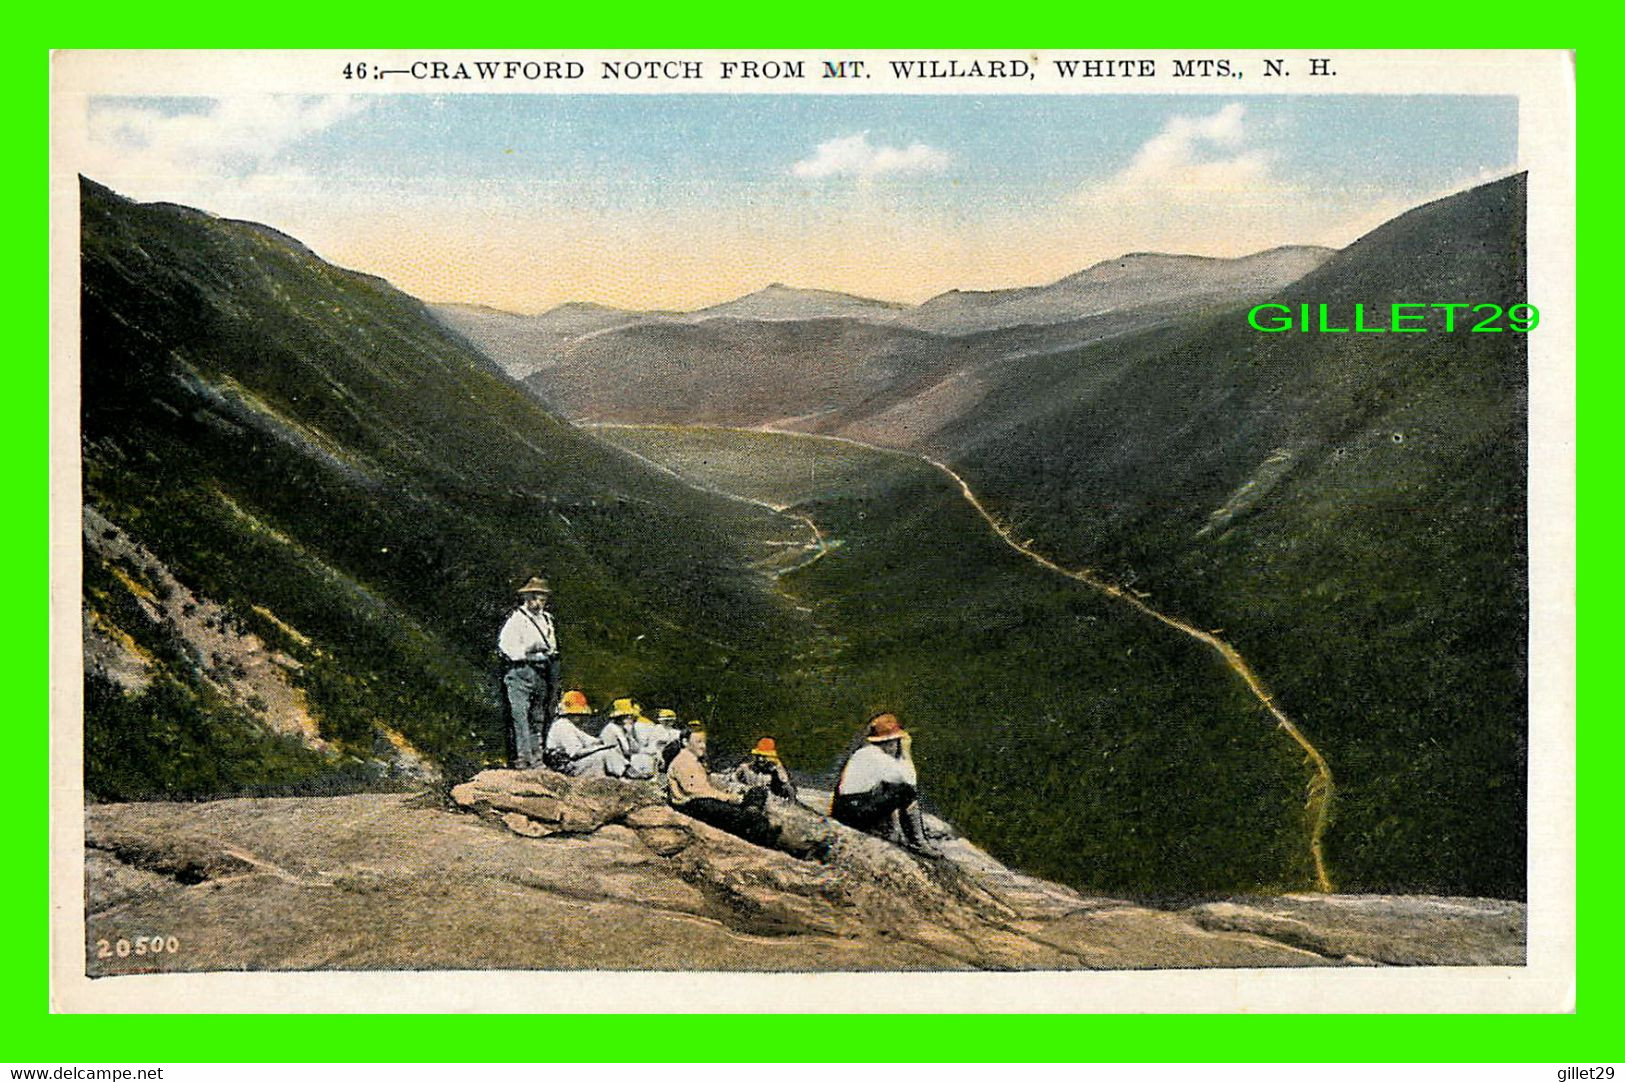 WHITE MOUNTAINS, NH - CRAWFORD NOTCH FROM MT. WILLARD - ANIMATED WITH PEOPLES - WMLCO - - White Mountains